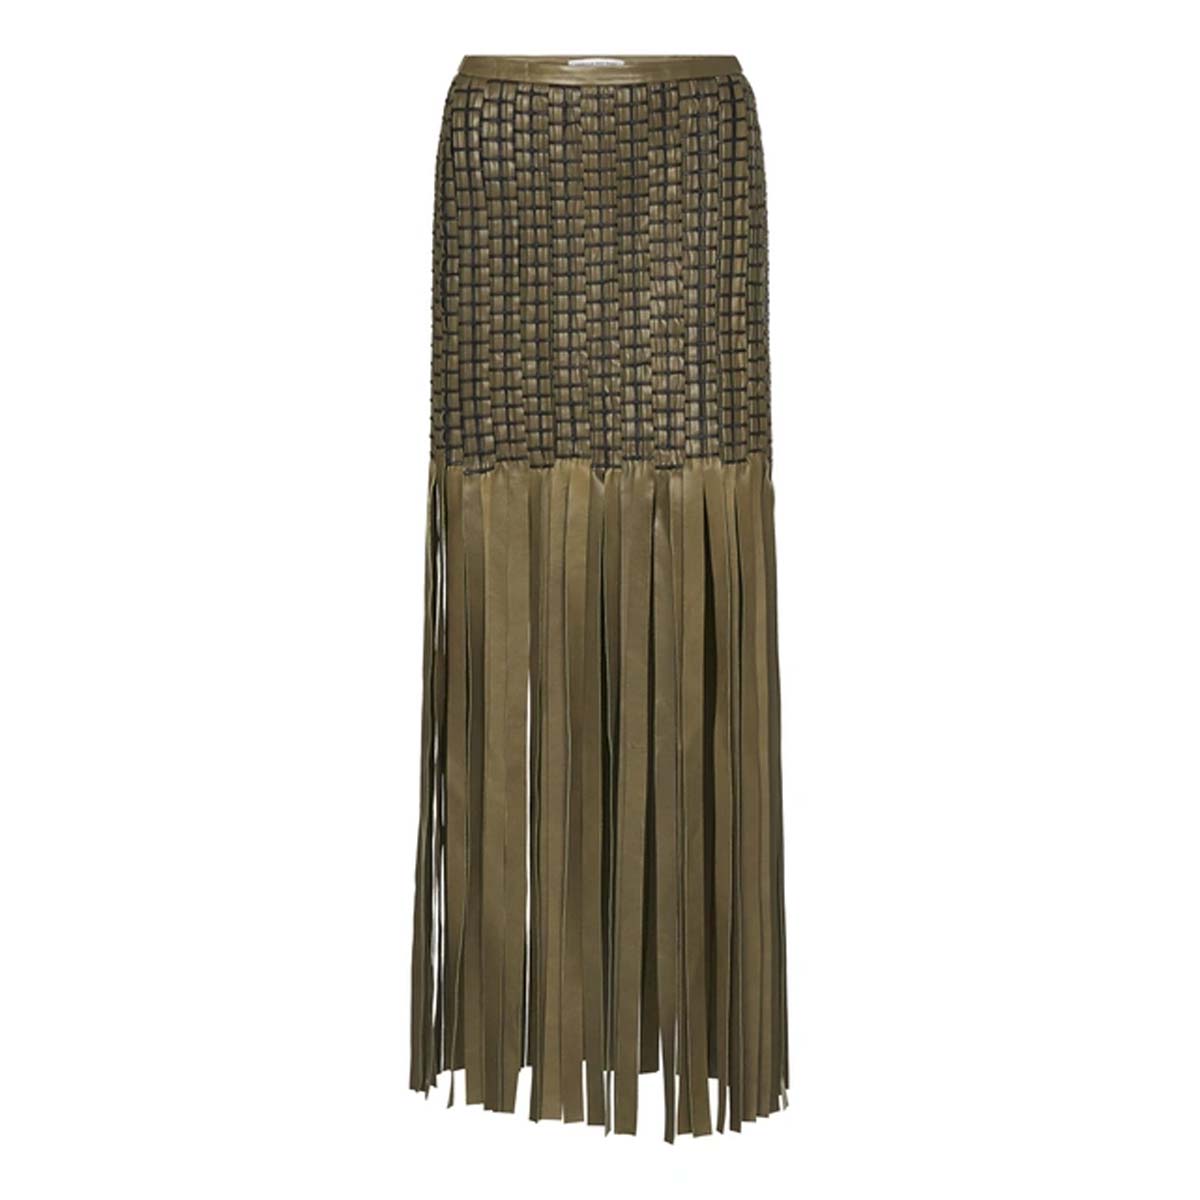 Camilla & Marc Doris Woven Leather Olive Green Skirt AU6 ~ Small